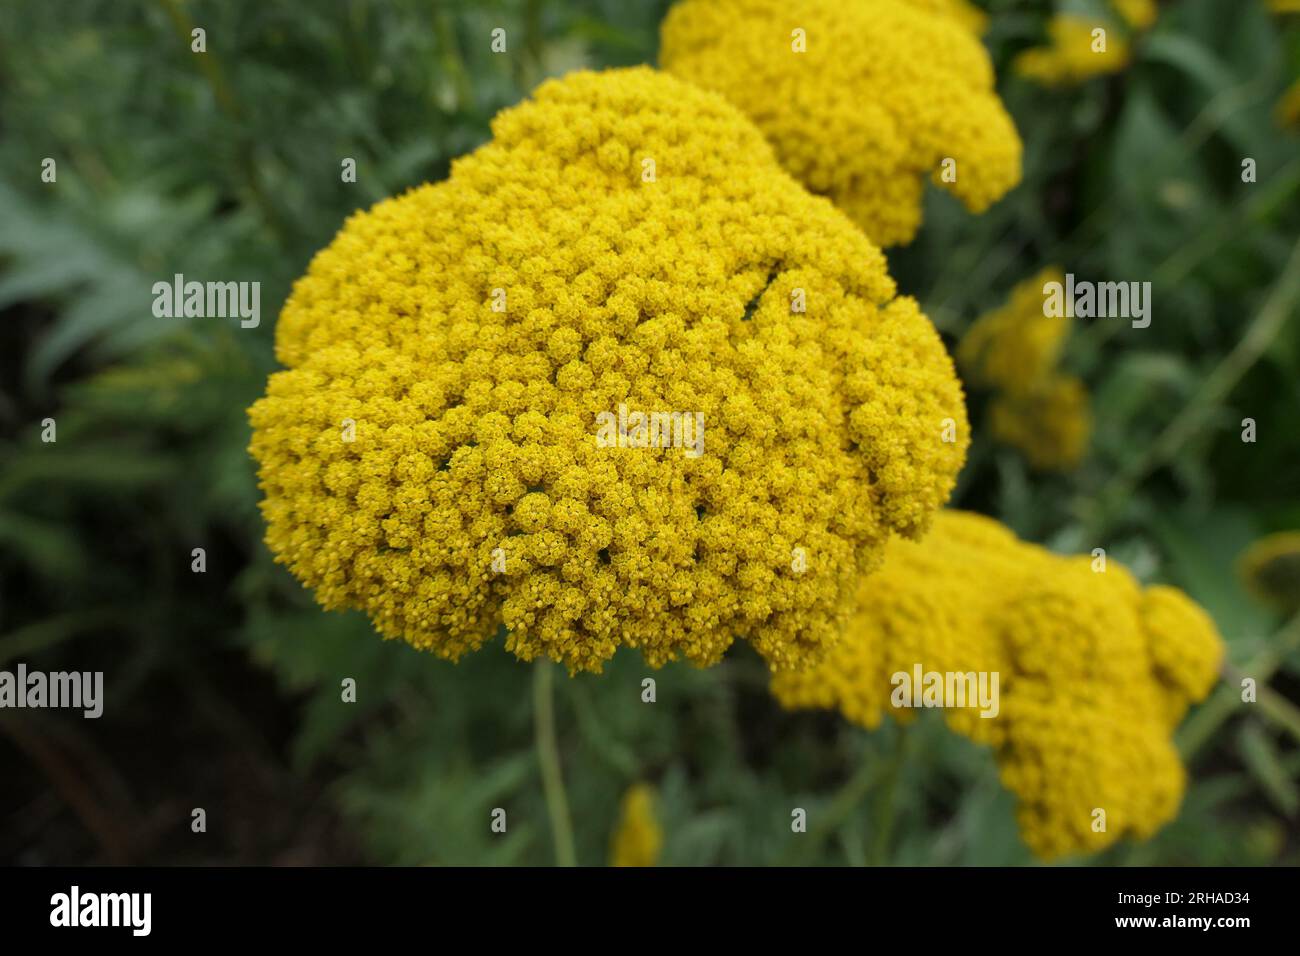 Closeup of the yellow flower head of the summer flowering herbaceous perennial garden plant achillea filipendulina parker's variety. Stock Photo